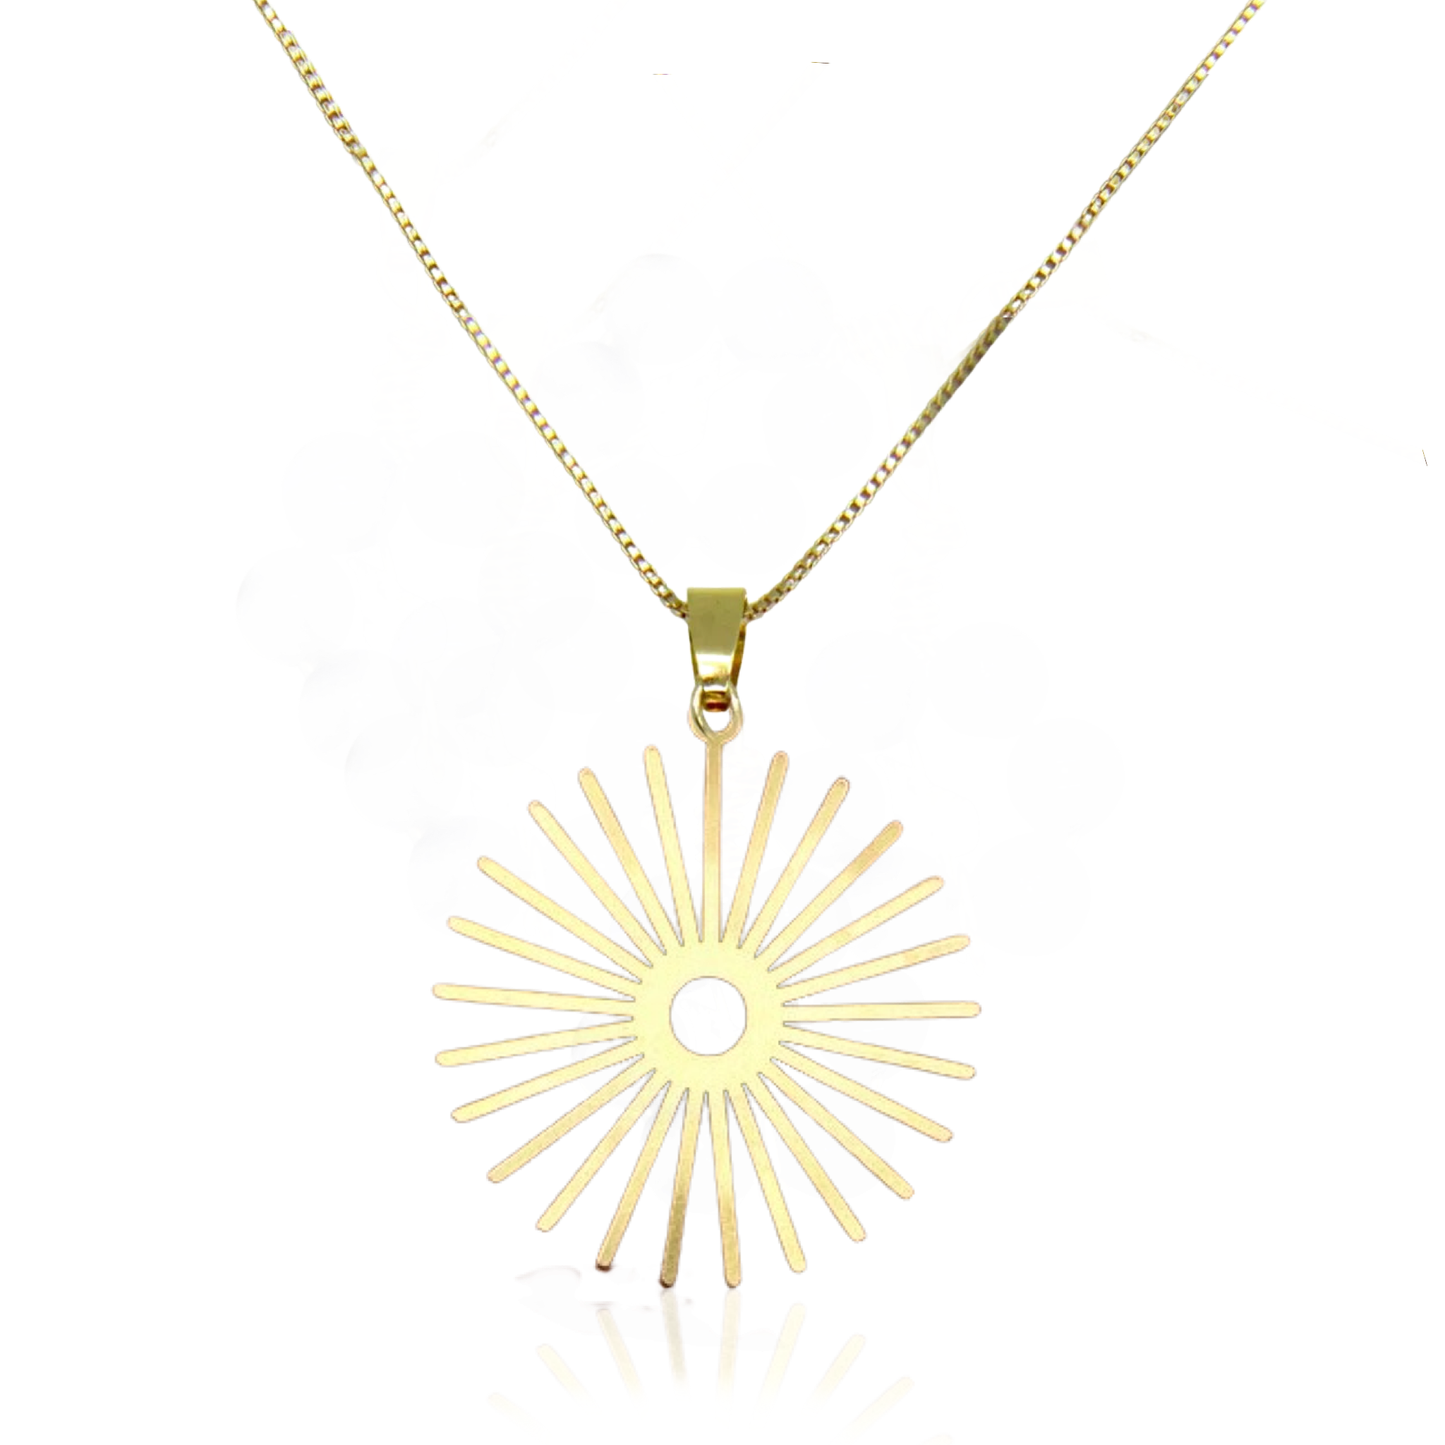 NEW Sun's Up Pendant Necklace